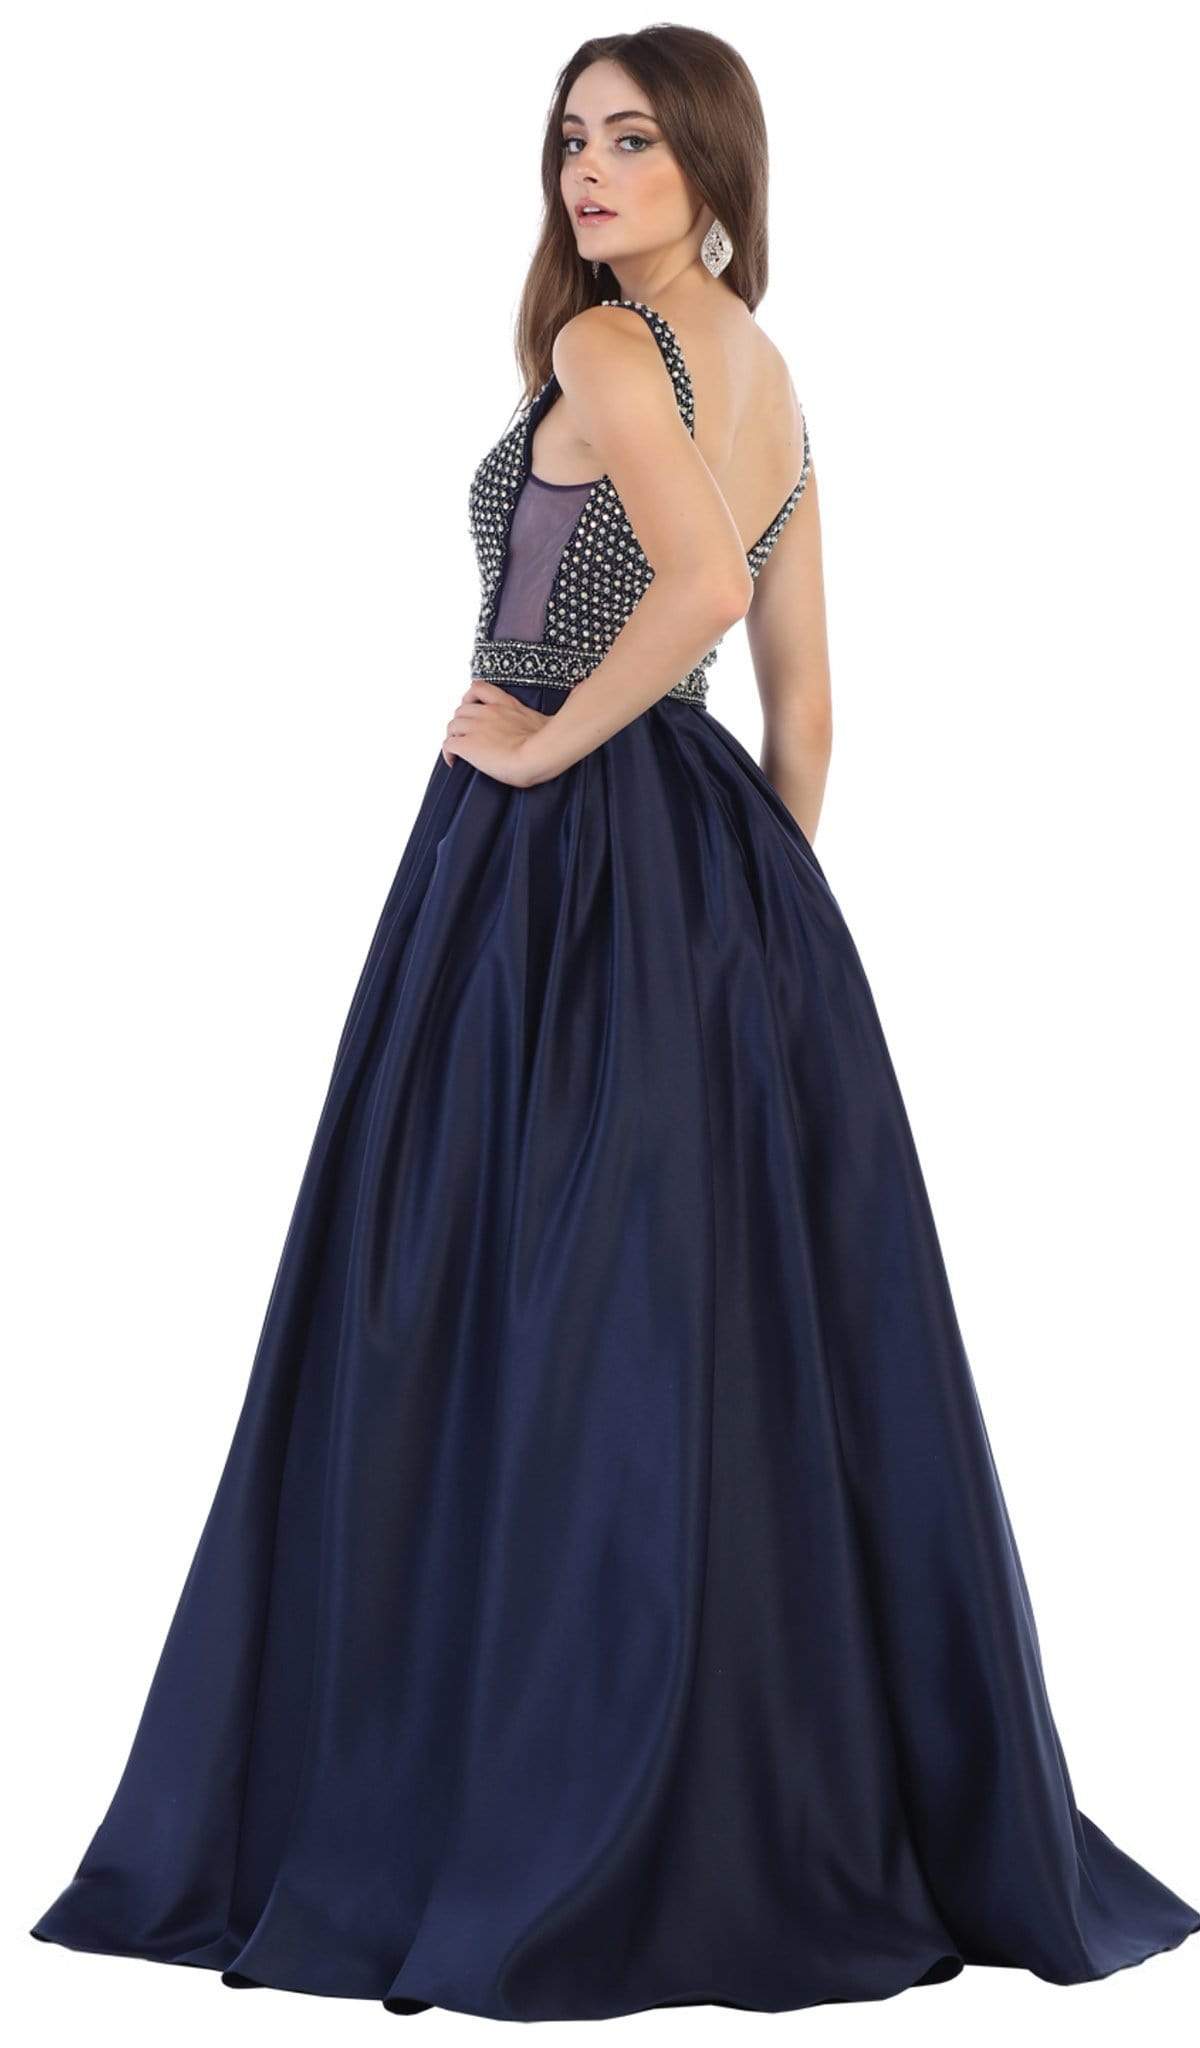 May Queen - RQ7680 Beaded Plunging V-Neck Ballgown Ball Gowns